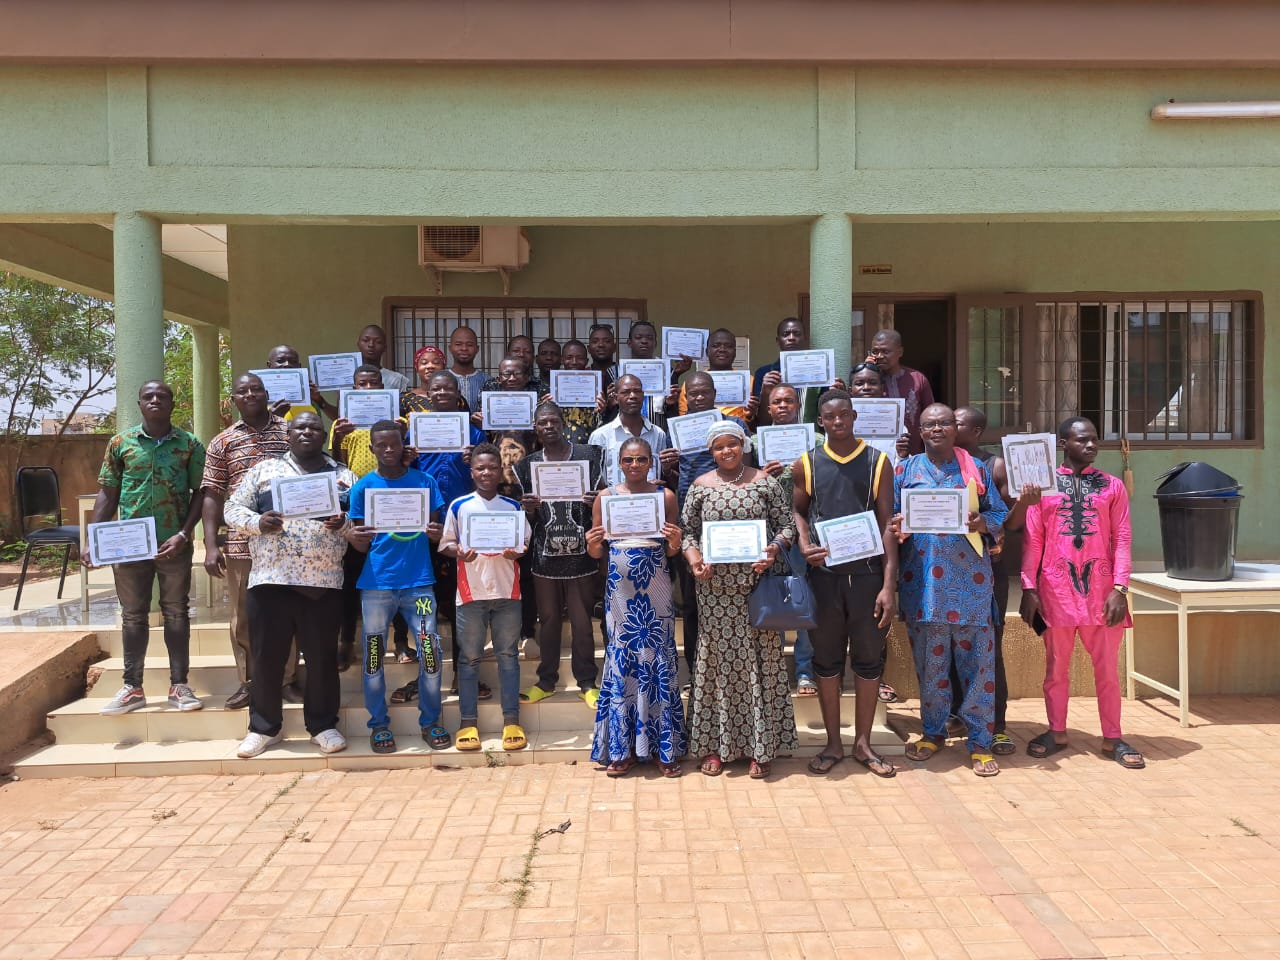 Participants with certificates